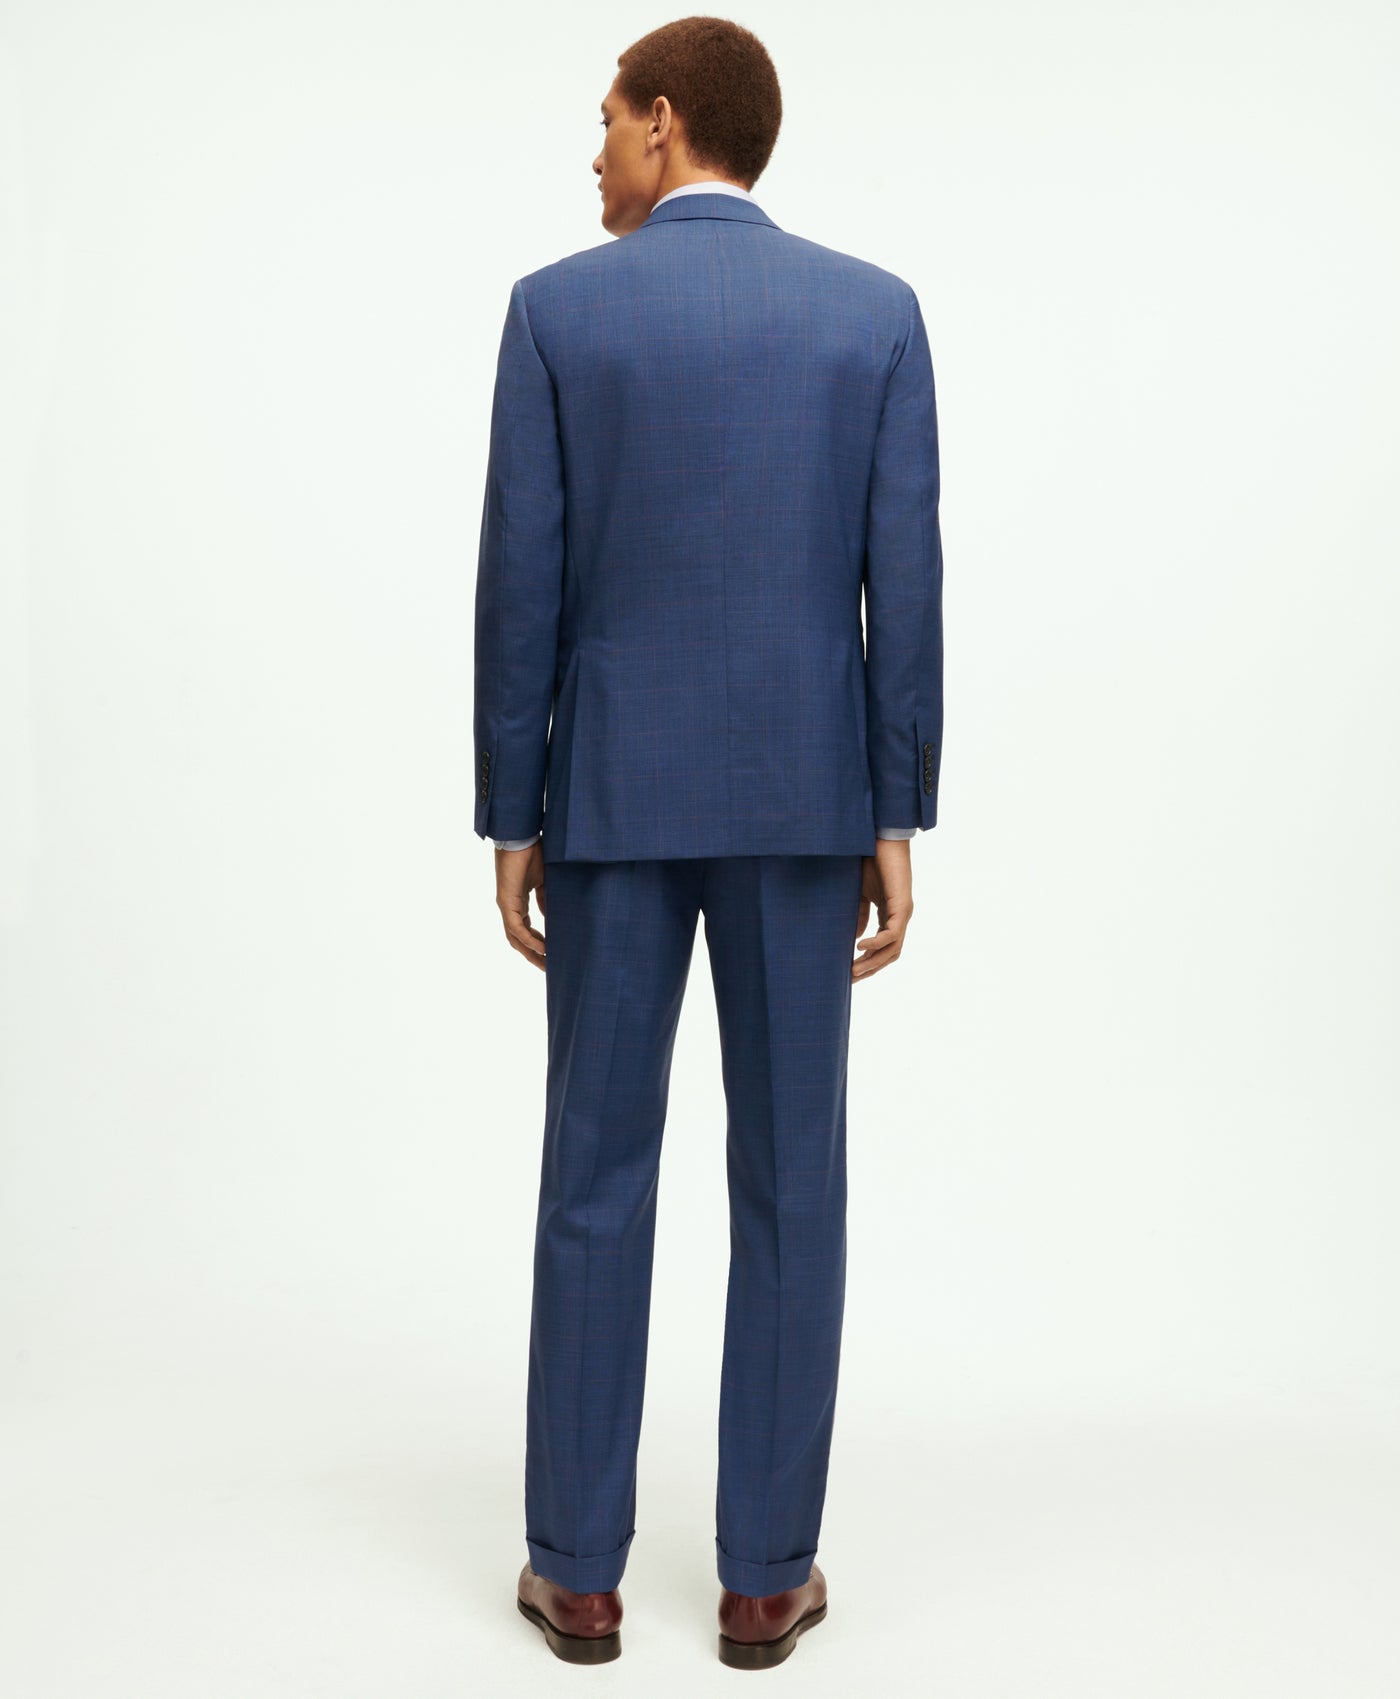 Milano Fit Wool Overcheck 1818 Suit - Brooks Brothers Canada